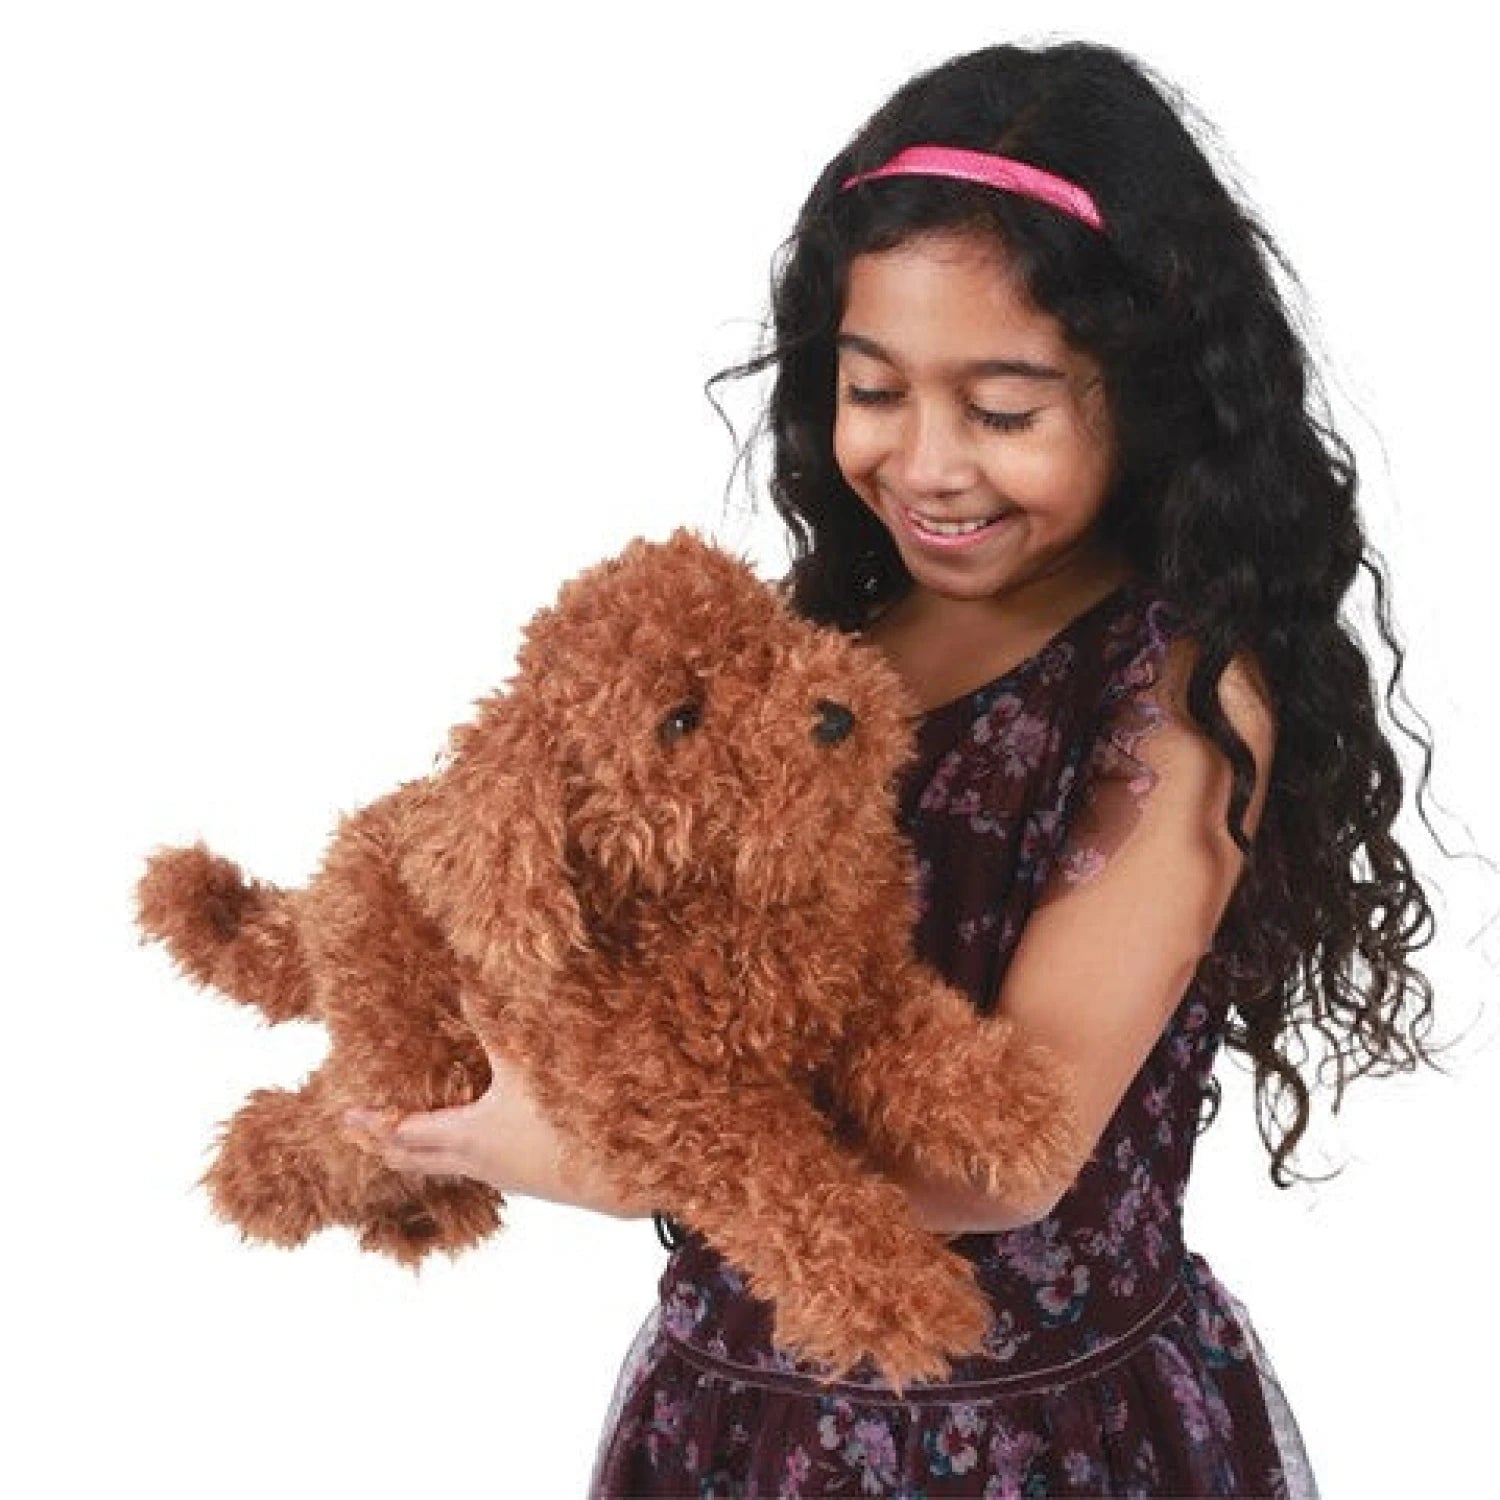 Toy Poodle Puppy Hand Puppet